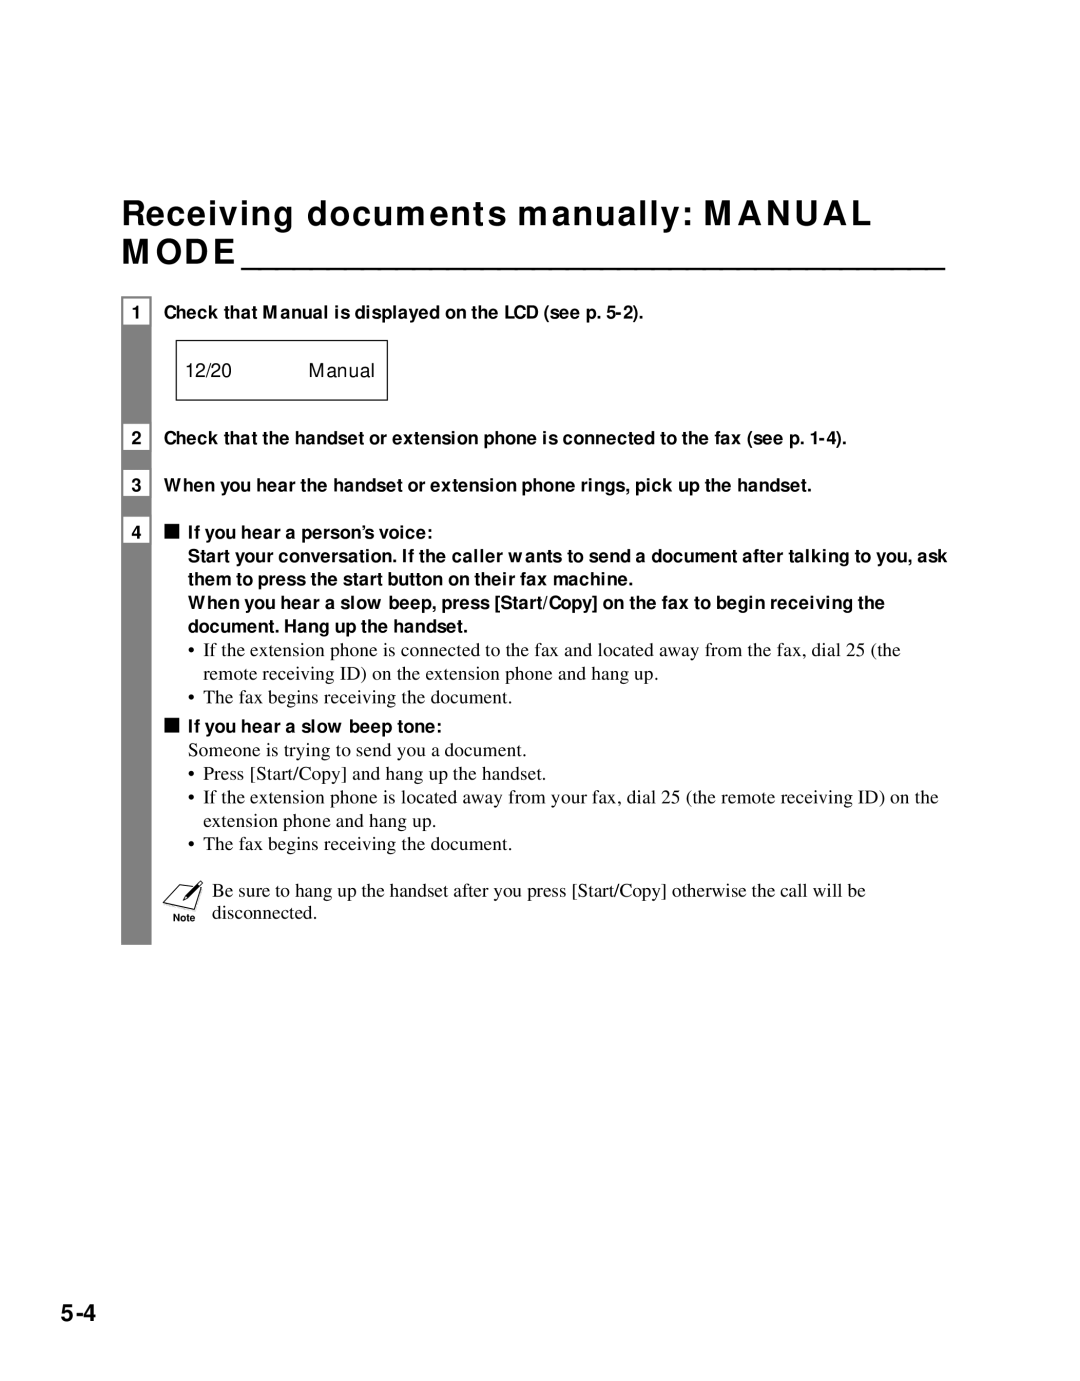 Canon B45 Receiving documents manually Manual Mode, Check that Manual is displayed on the LCD see p 